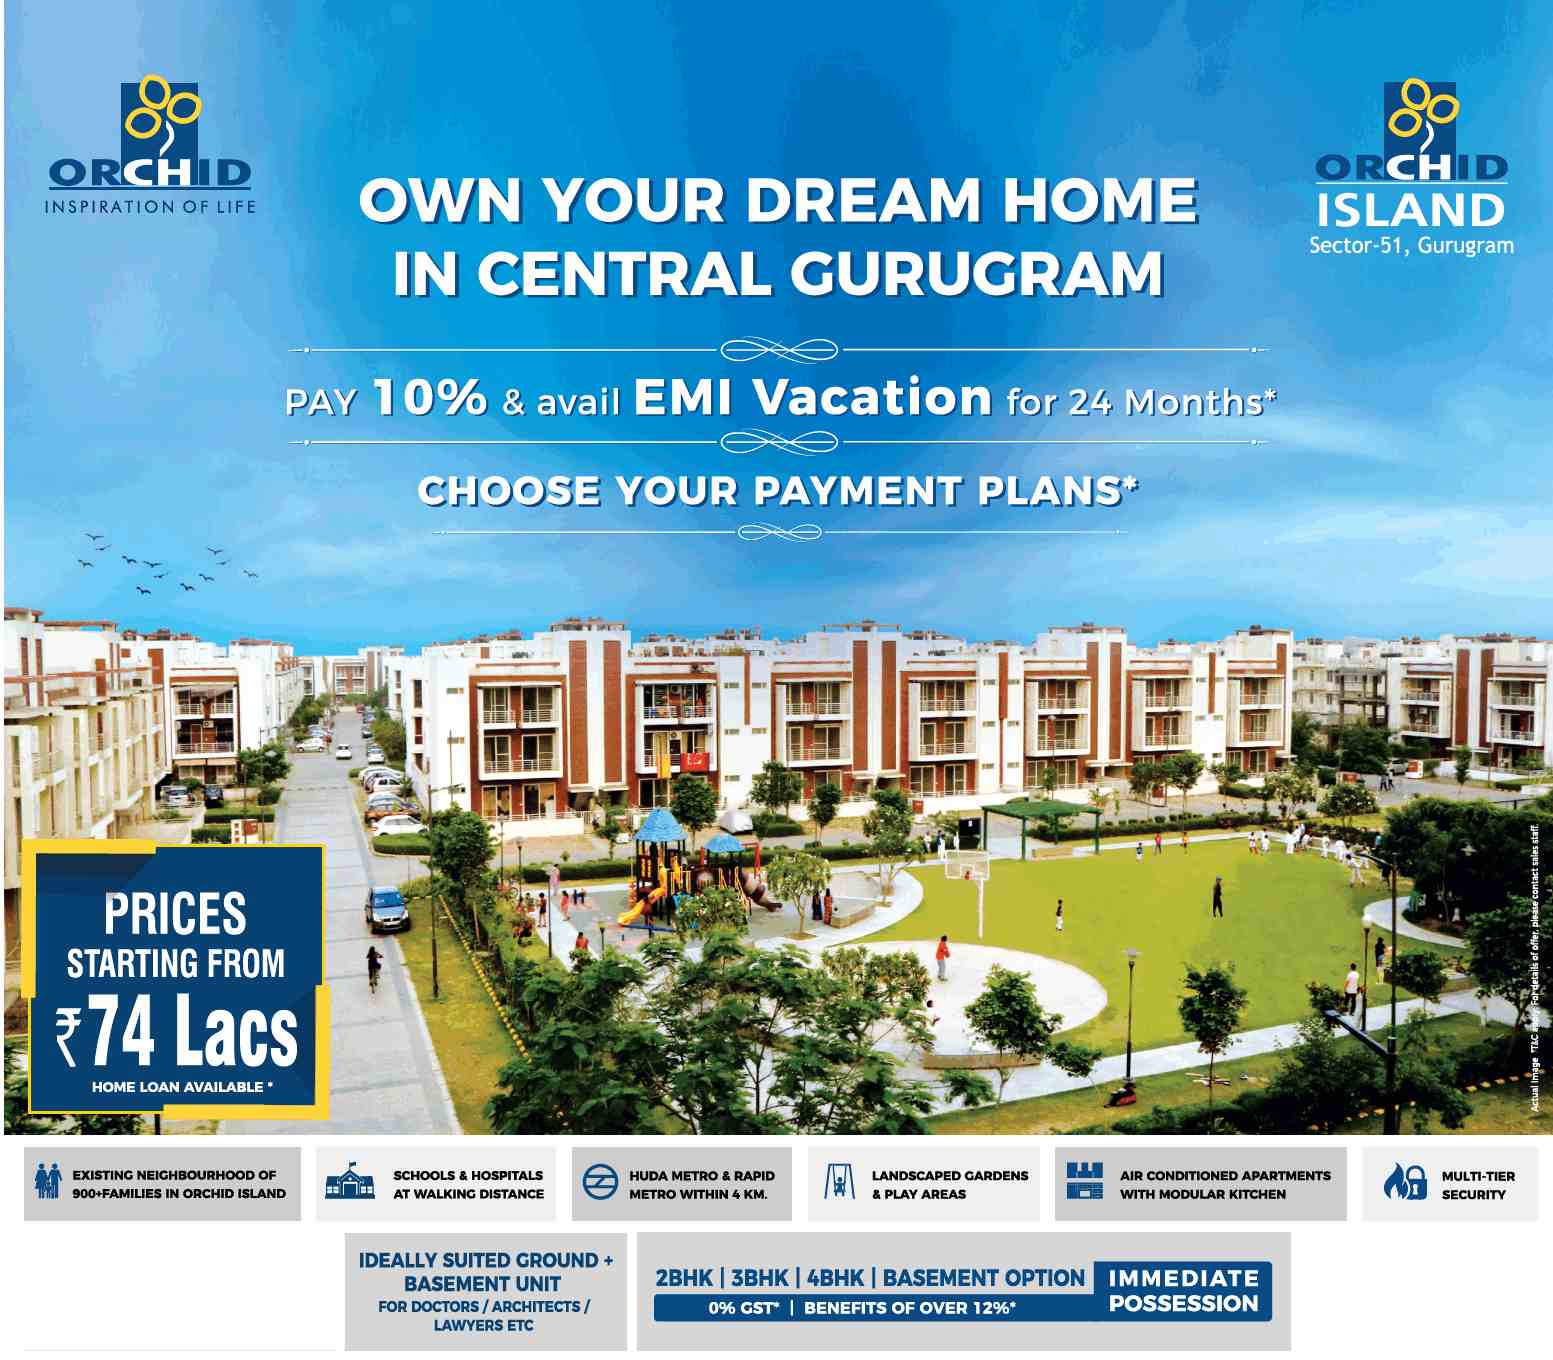 Pay 10% & avail EMI vacation for 24 months at Orchid Island in Sector 51, Gurgaon Update